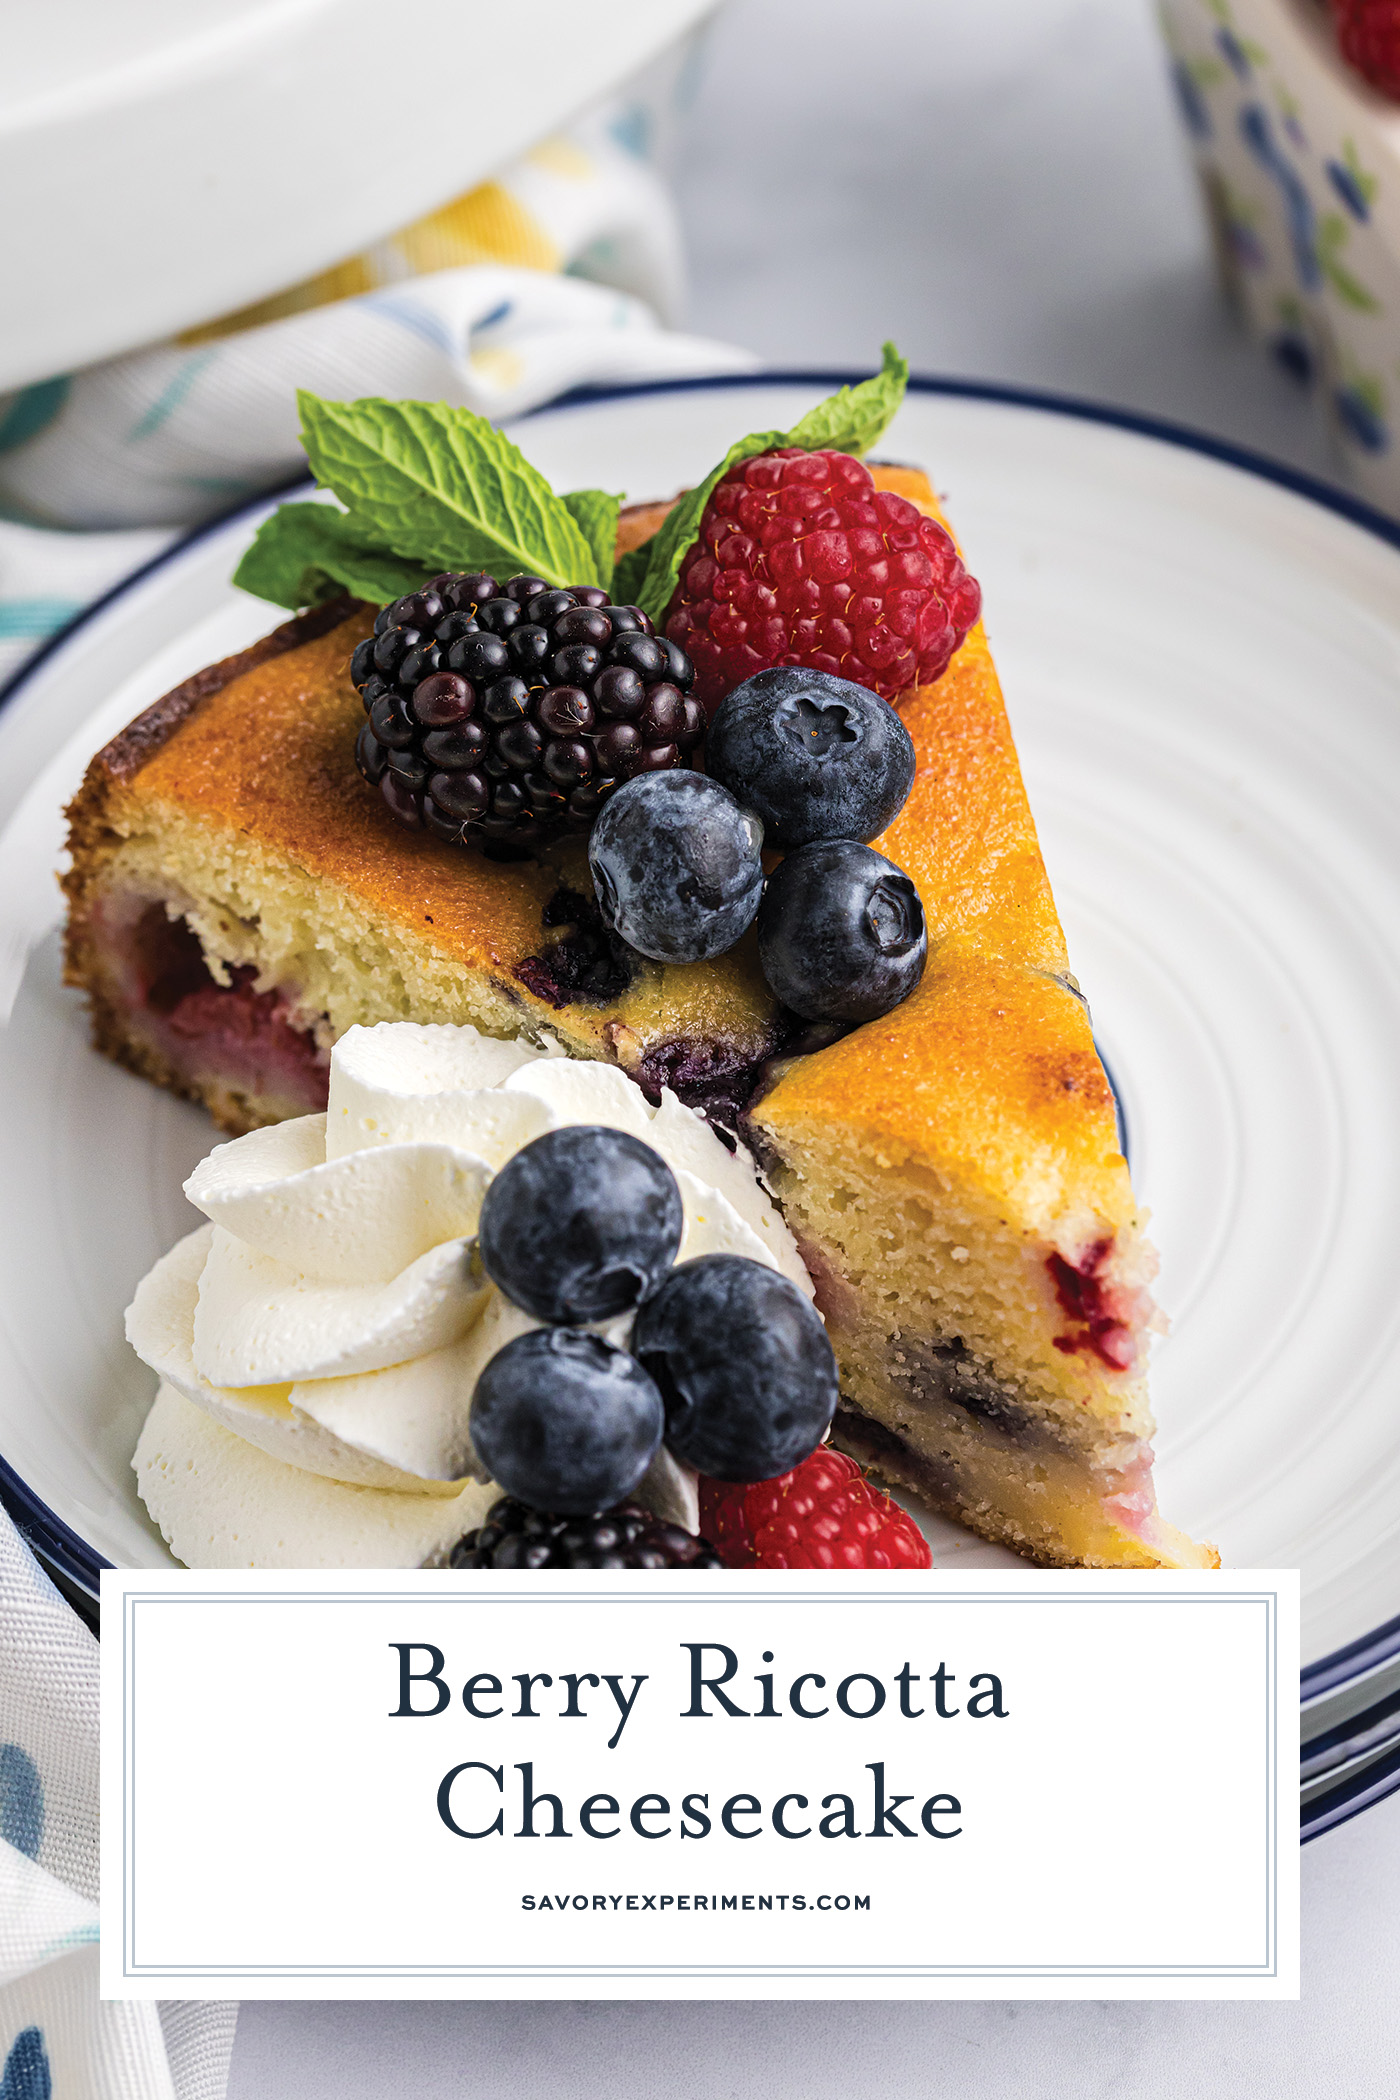 slice of berry ricotta cheesecake on plate with text overlay